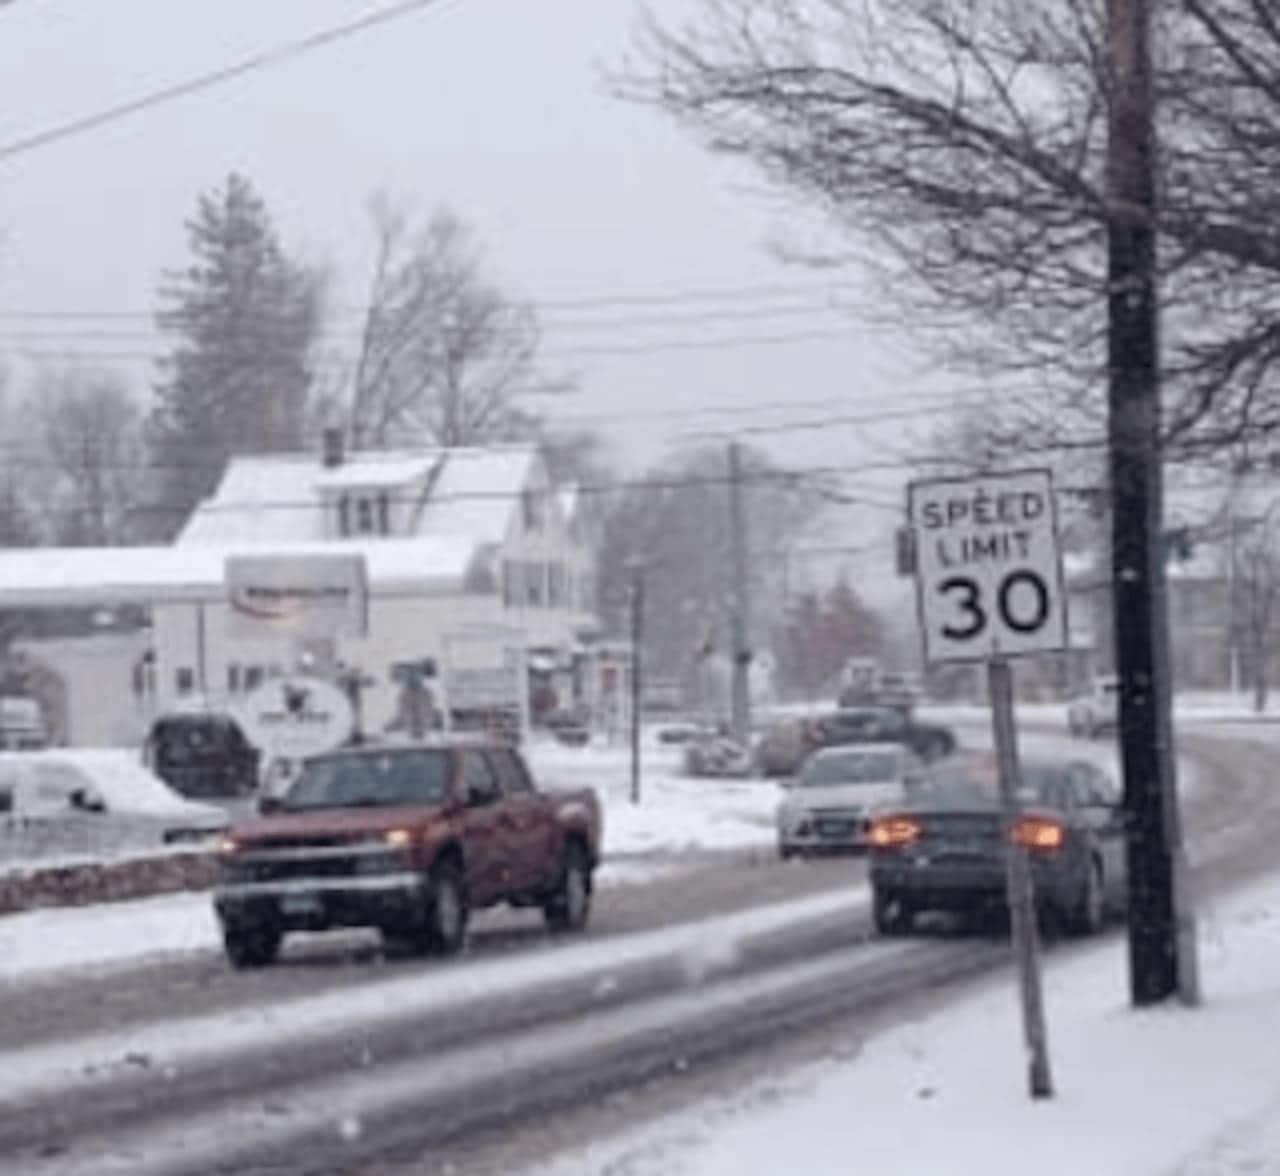 Motorist should use extreme caution if they have to travel the roadways Thursday during the
winter storm, state police said.